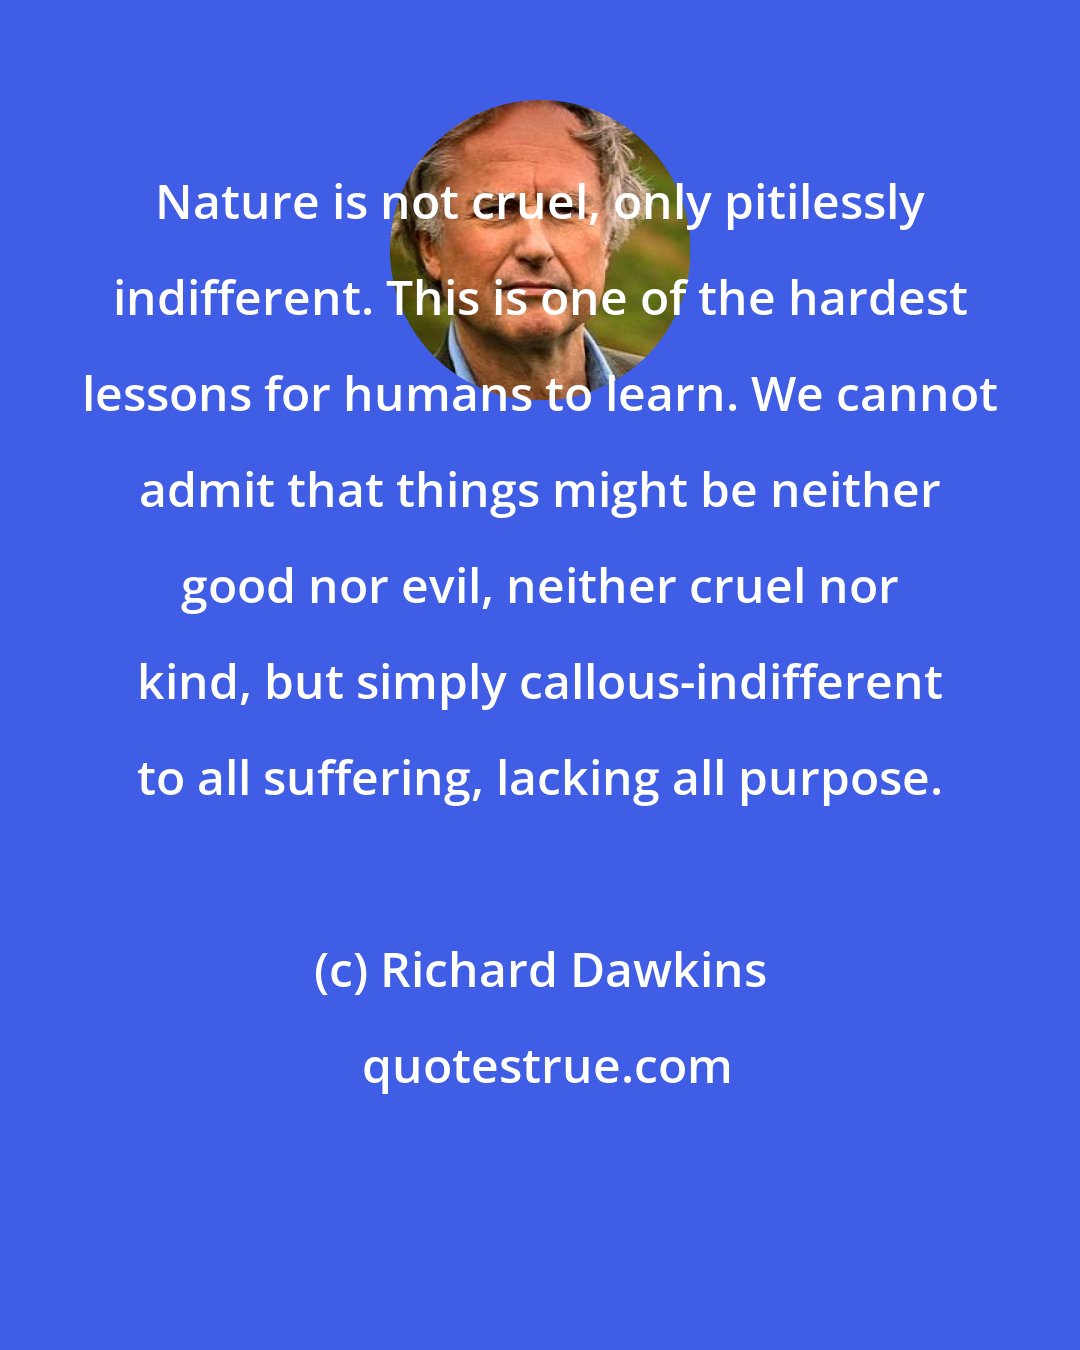 Richard Dawkins: Nature is not cruel, only pitilessly indifferent. This is one of the hardest lessons for humans to learn. We cannot admit that things might be neither good nor evil, neither cruel nor kind, but simply callous-indifferent to all suffering, lacking all purpose.